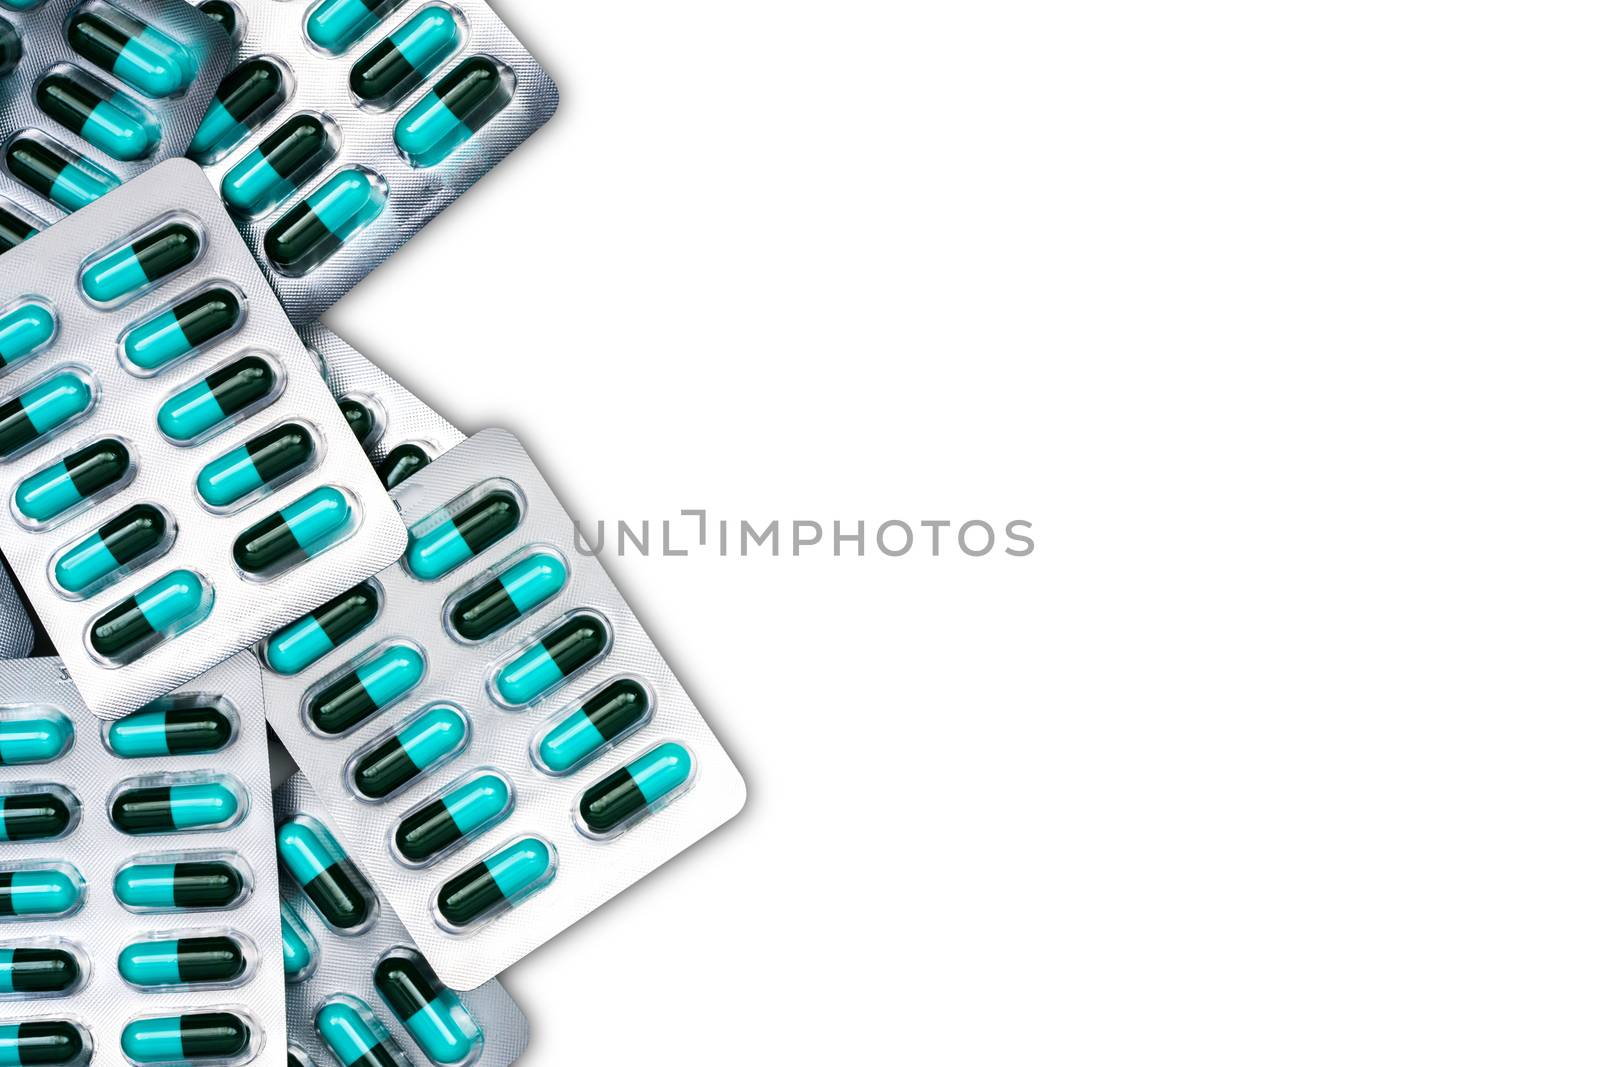 Top view of blue and green antibiotics capsule pills in blister packs isolated on white background with copy space. Antimicrobial drug resistance and antibiotics drug use with reasonable concept. Pharmaceutical industry. Pharmacy background. Global healthcare concept.